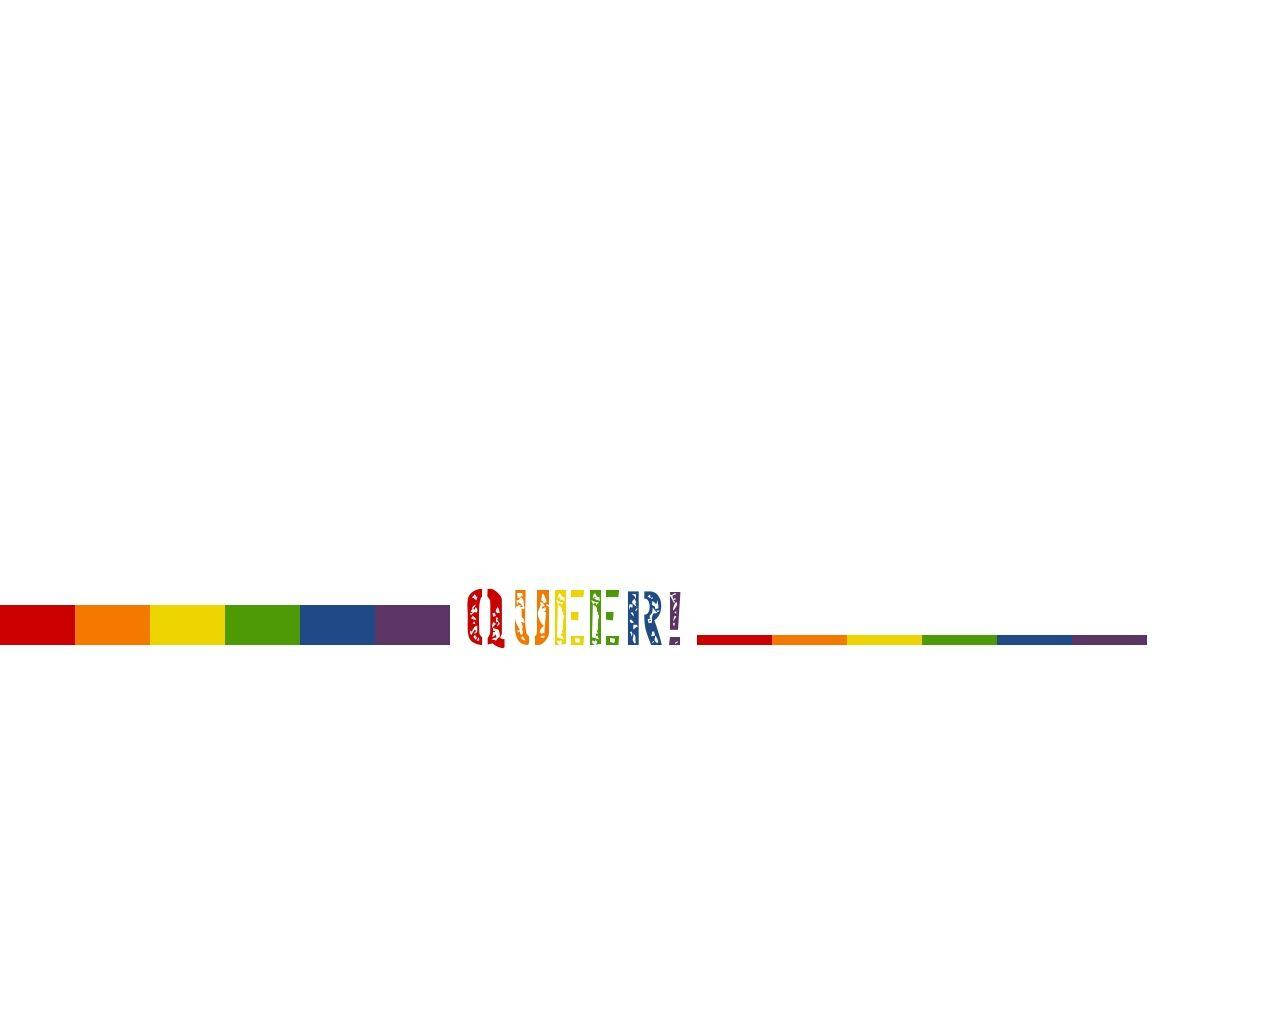 Queer Text In Rainbow Colors On A White Background Background